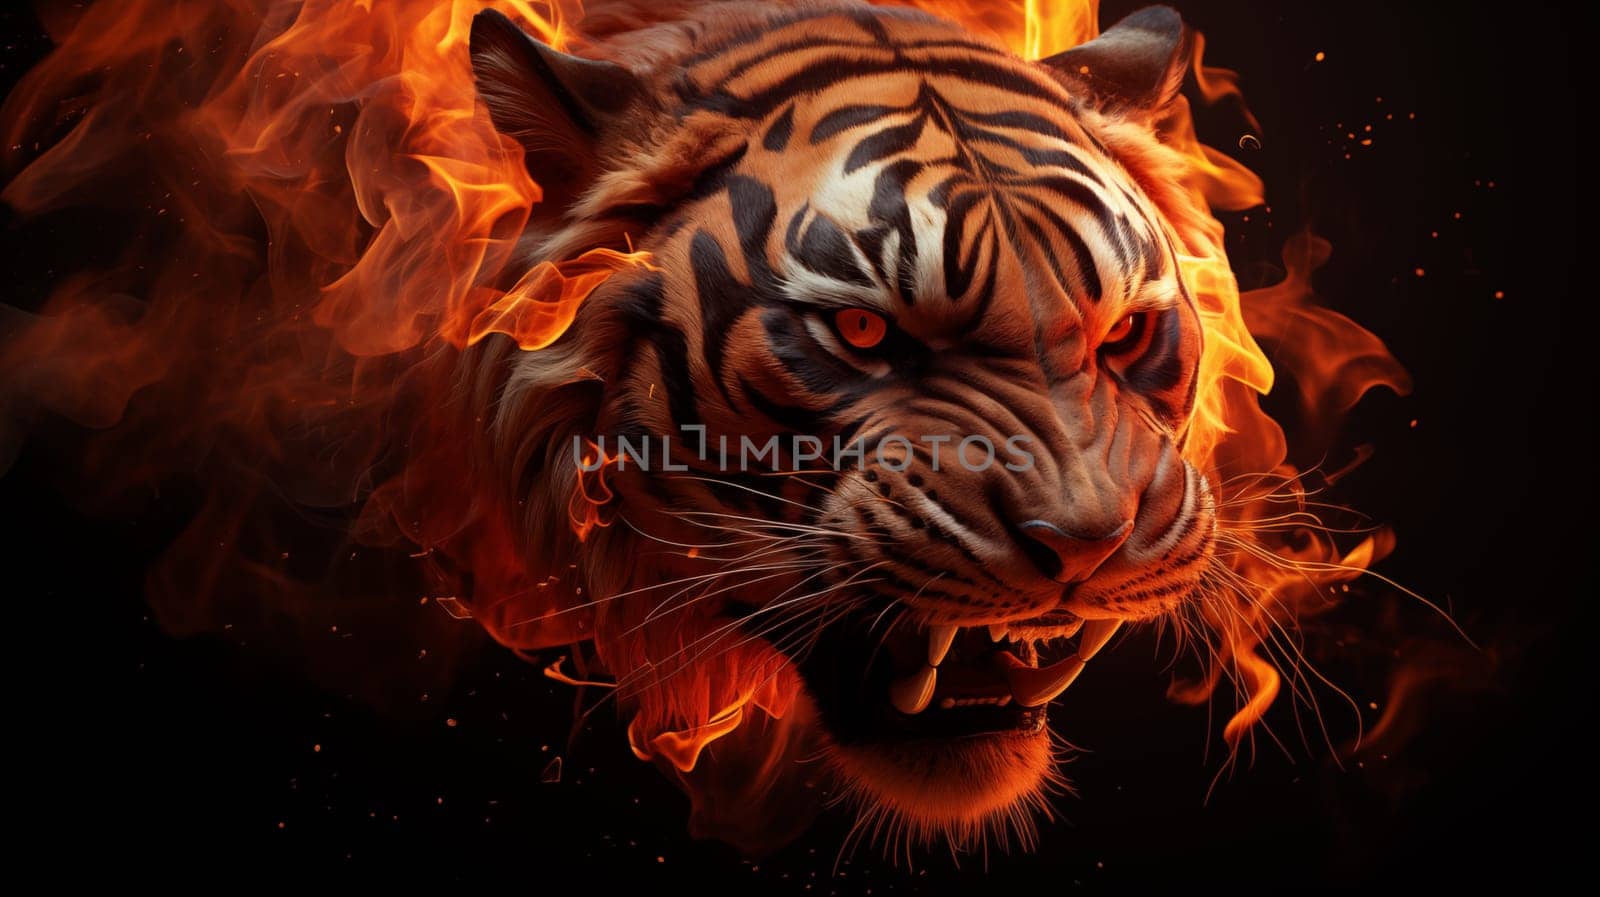 Head of an angry, fiery tiger, on a black background.